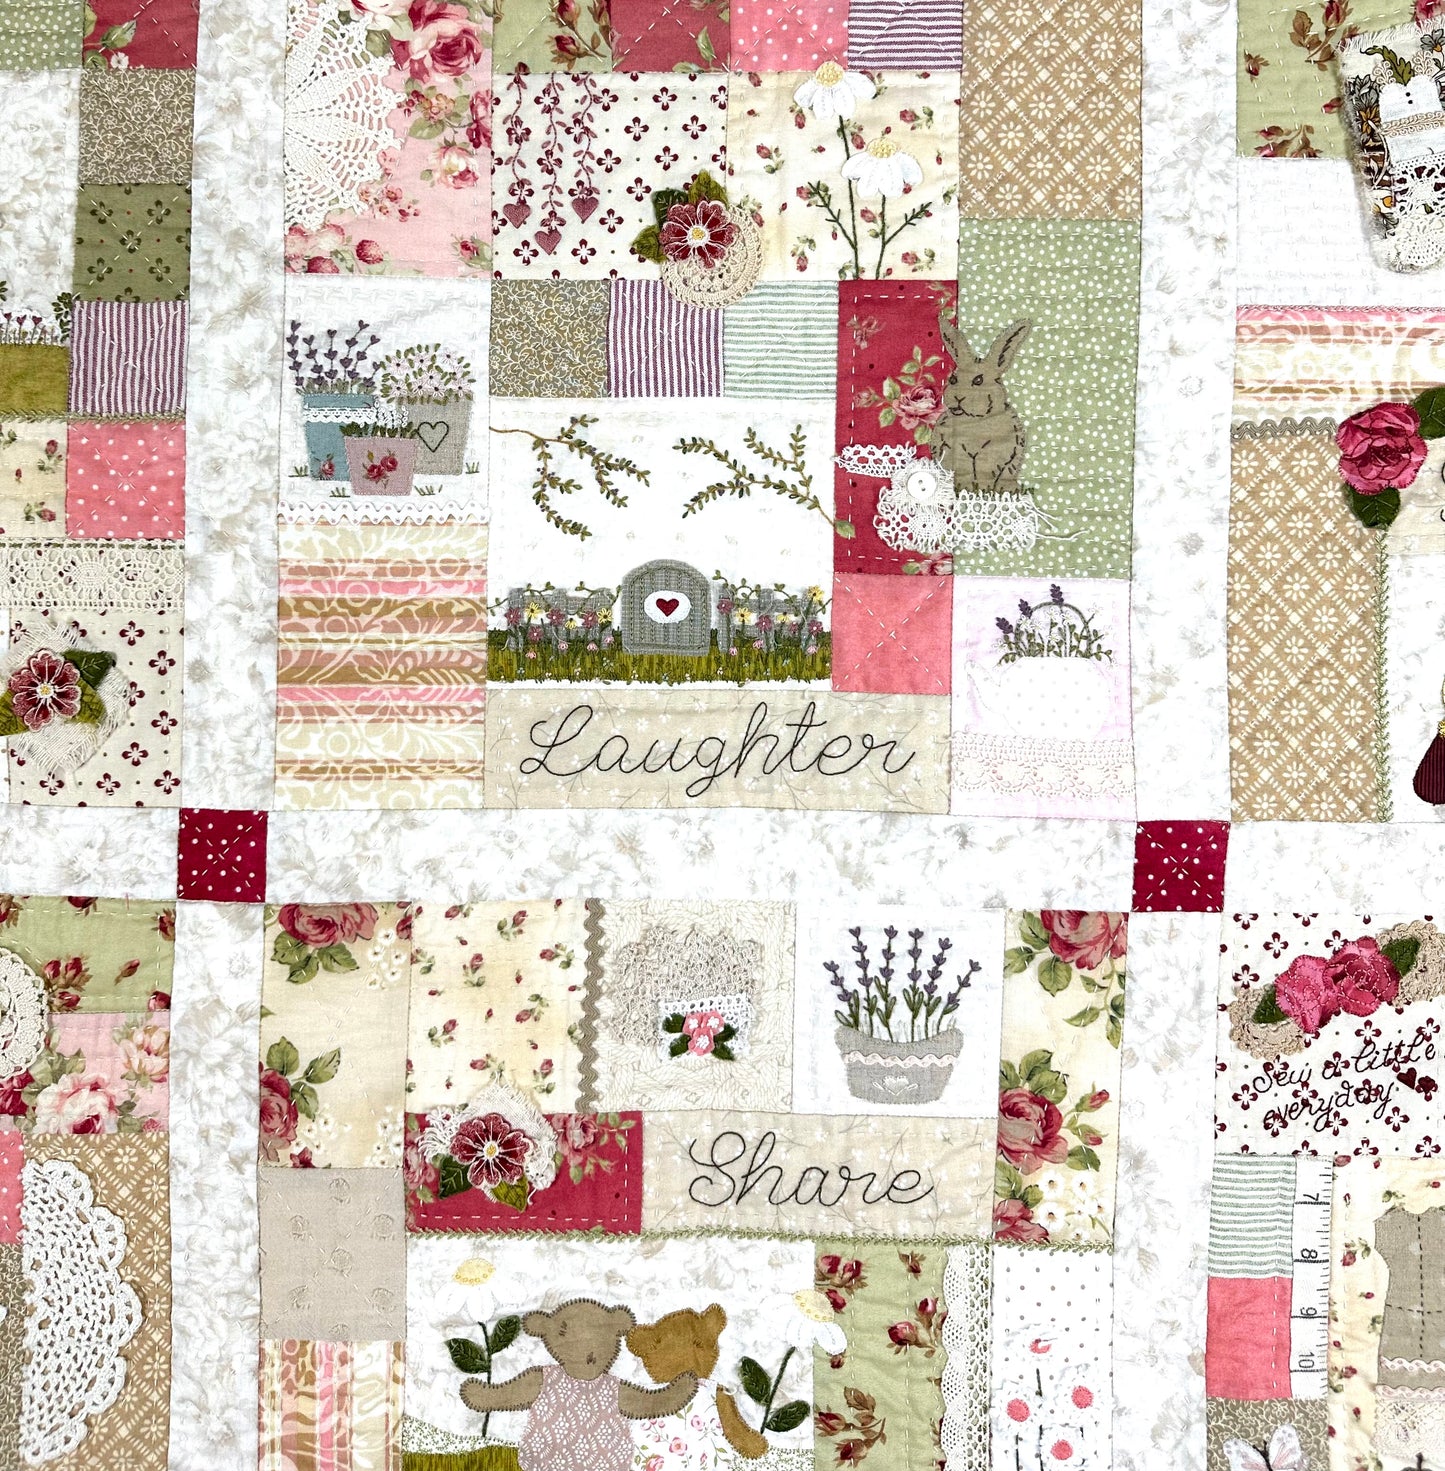 Friendship Quilt (new colours) - full kit with applique fabrics and embellishments